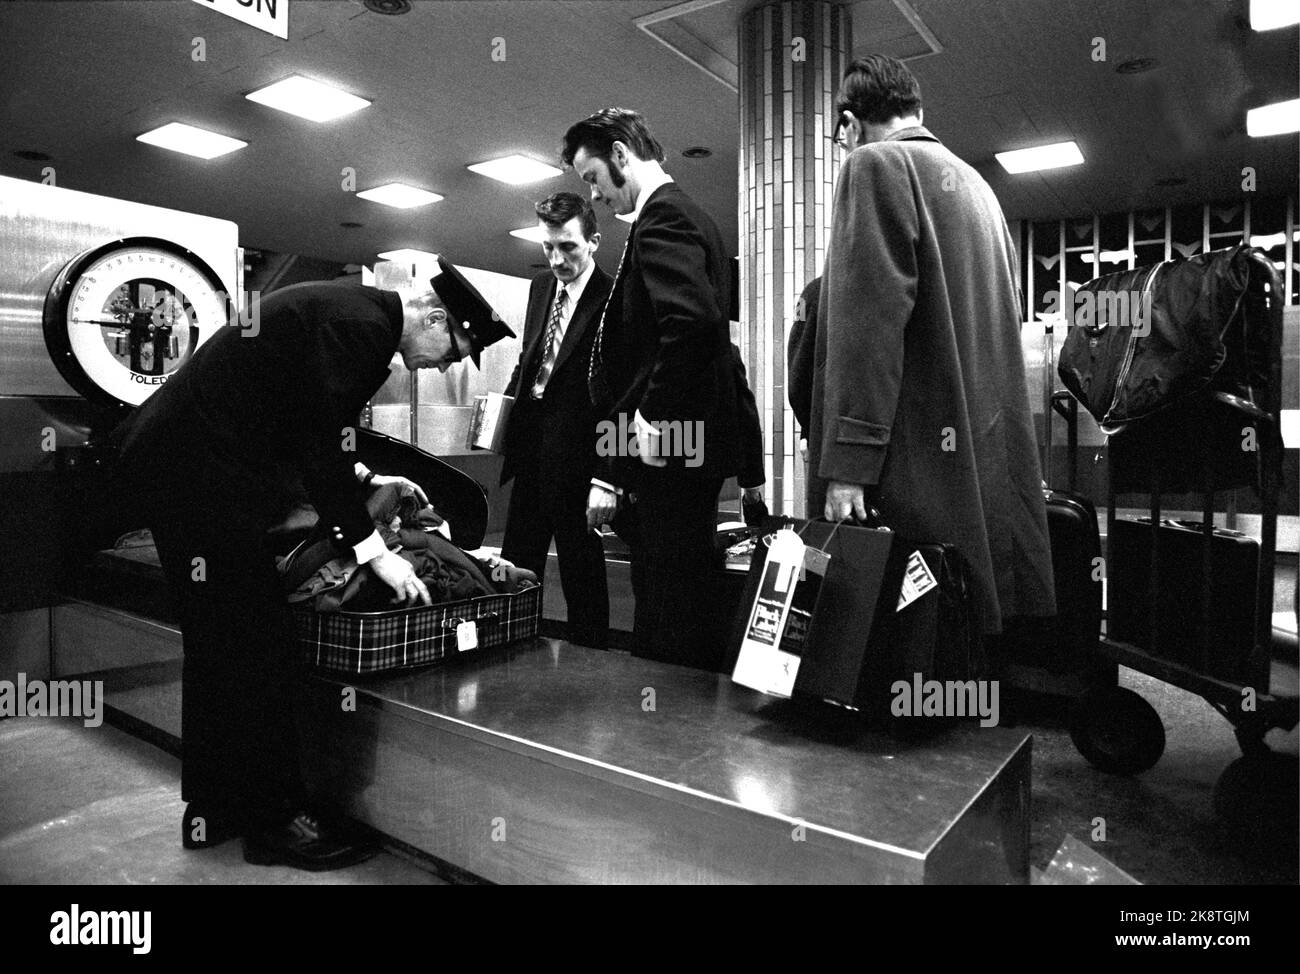 Fornebu February 1970 From Oslo Airport Fornebu. What happens at an airport during the day? Passengers on the way through customs after arrival. Toller checks a suitcase. Photo: Per Ervik / Current / NTB Stock Photo